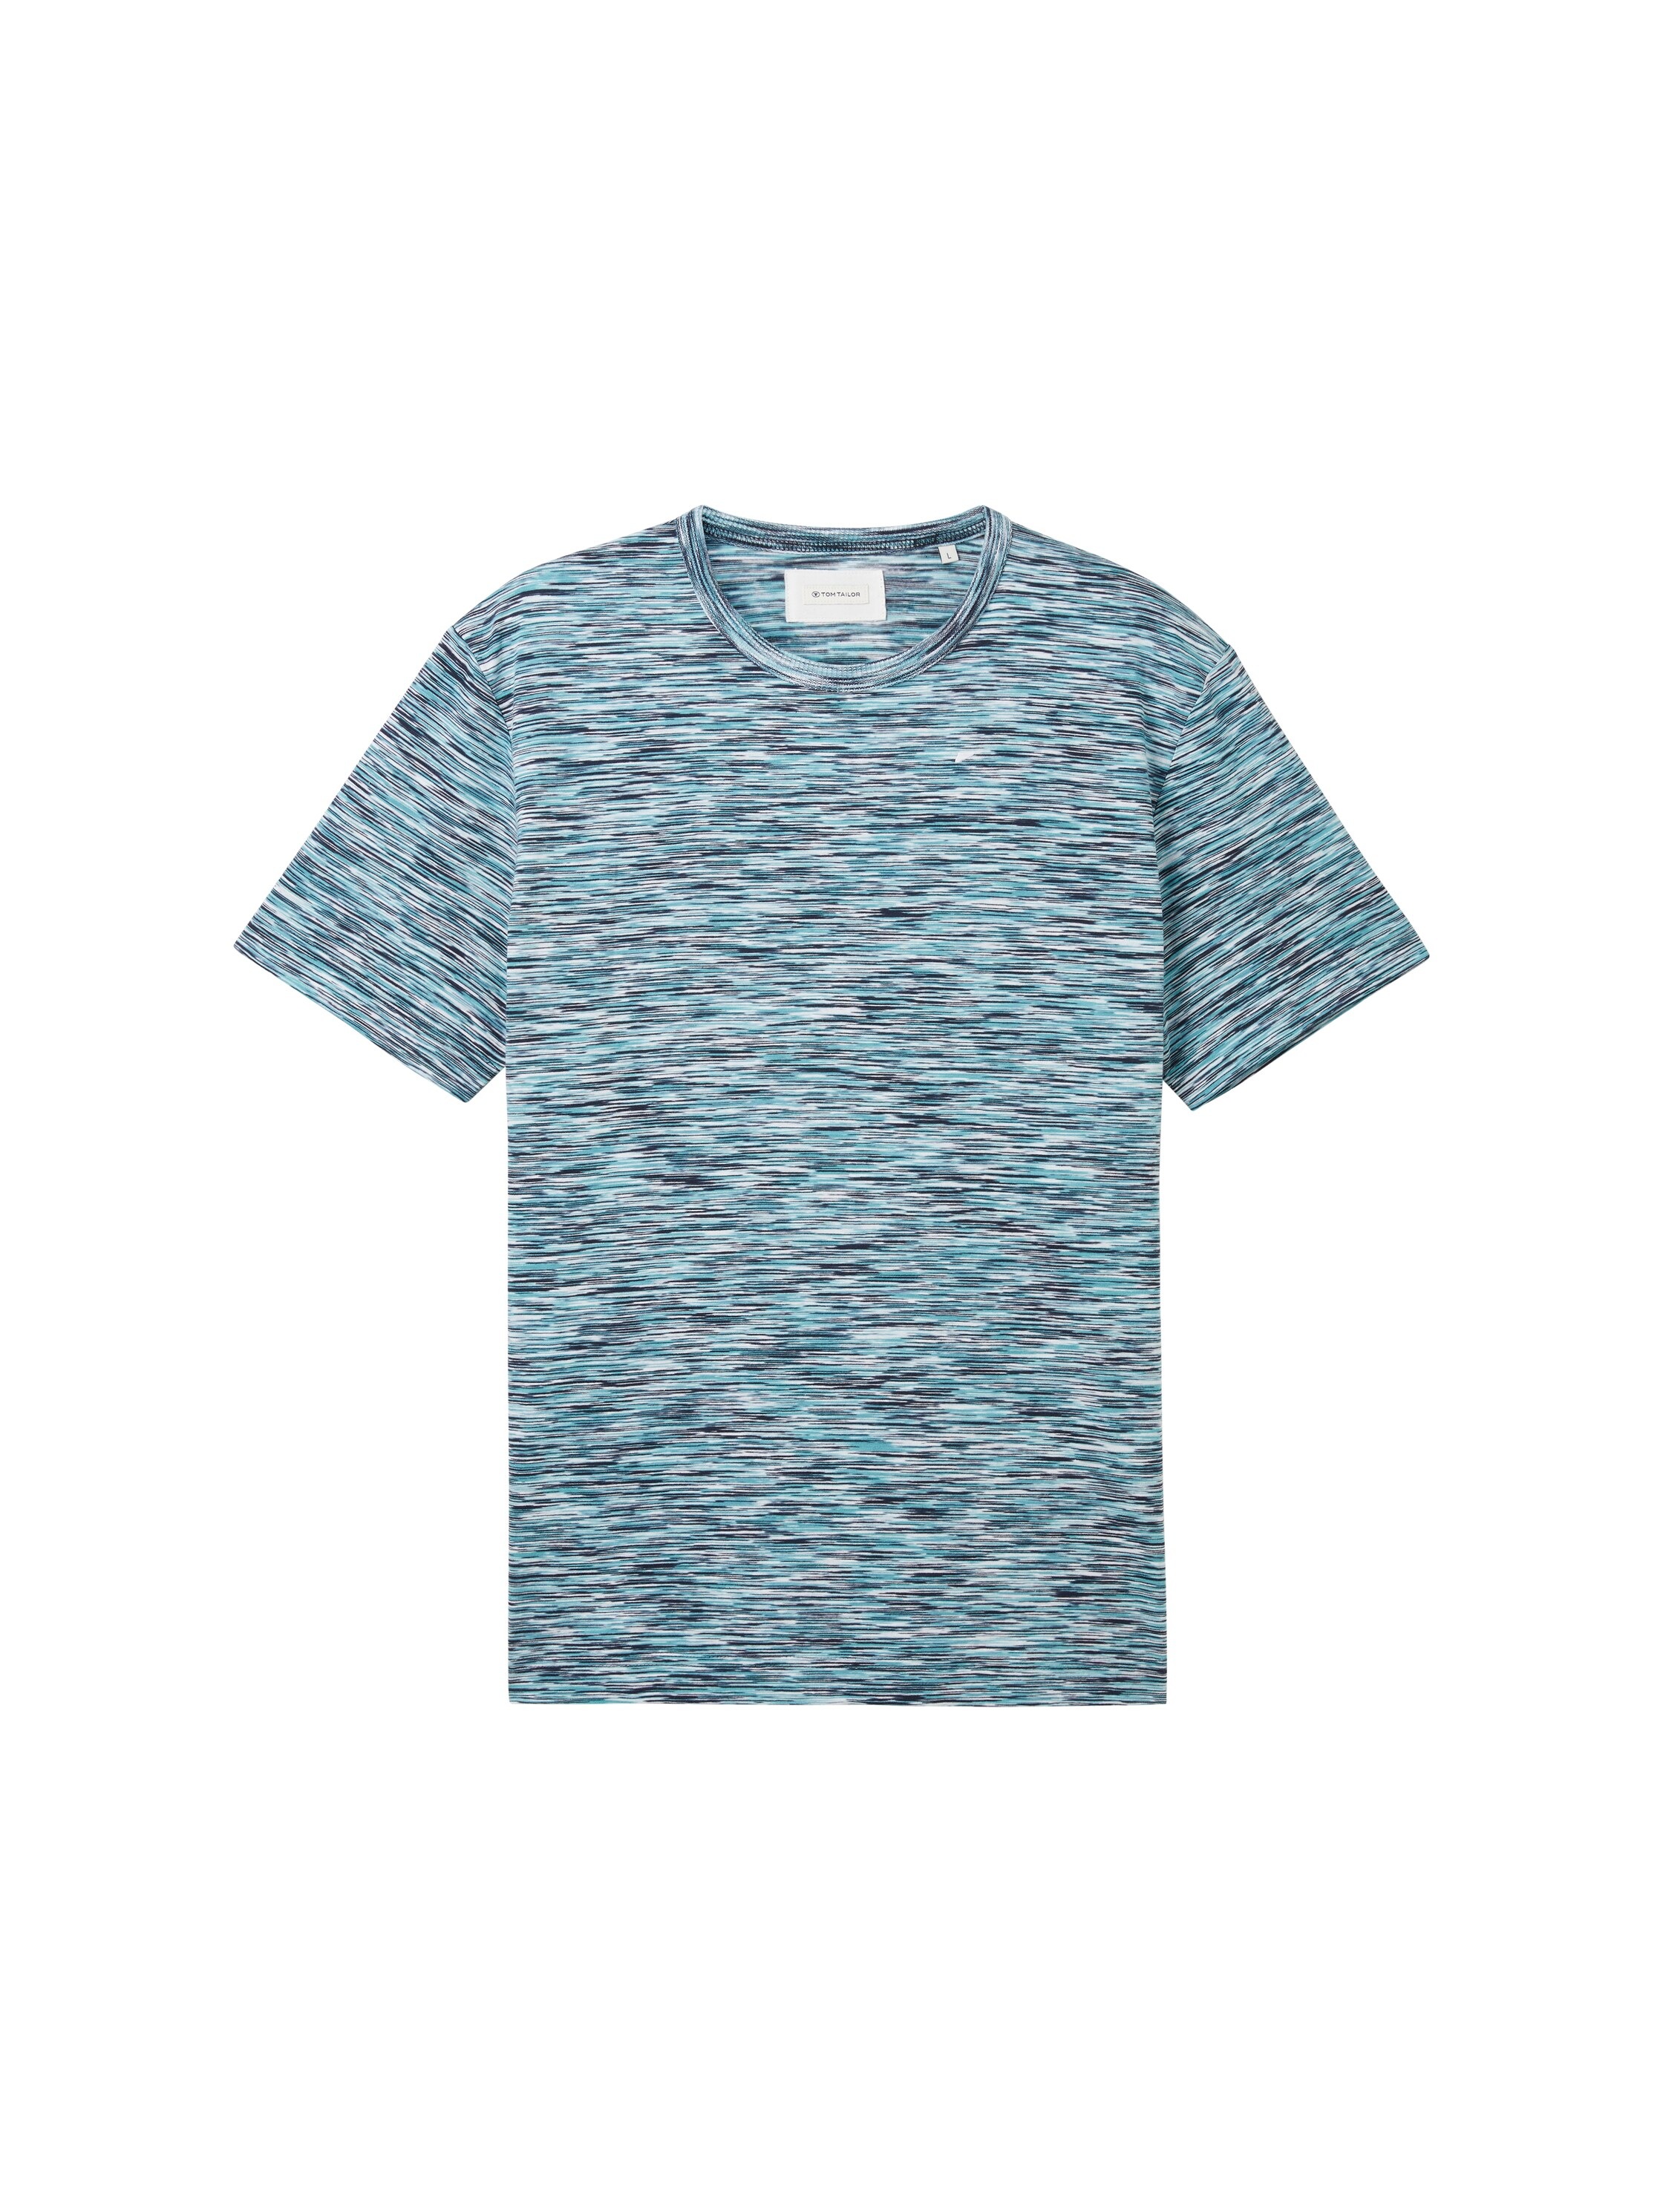 TOM TAILOR T-Shirt, mit Muster